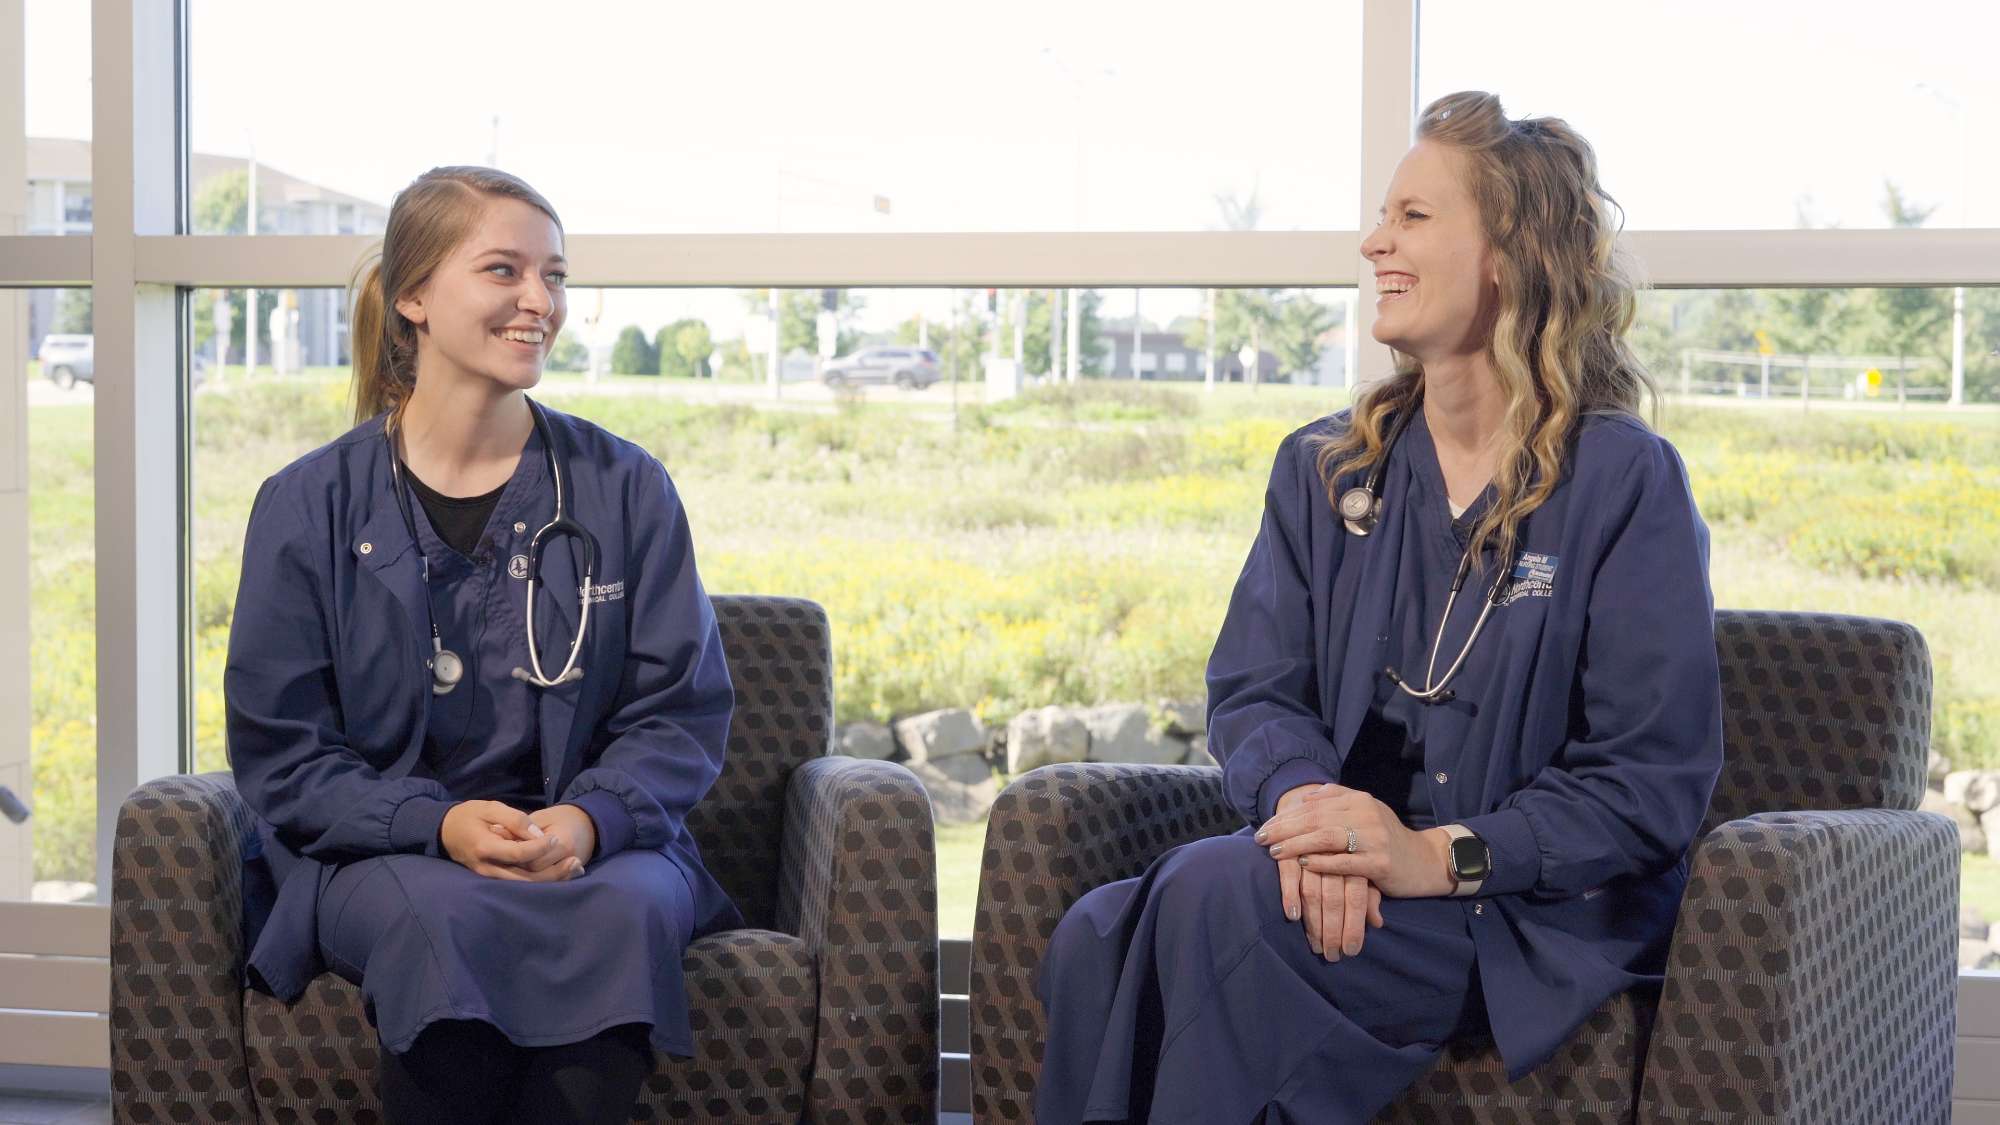 Two Nursing students, Jacquelynn and Angela Morrow, laughing and chatting while sitting near windows in the NTC Center for Health Sciences.